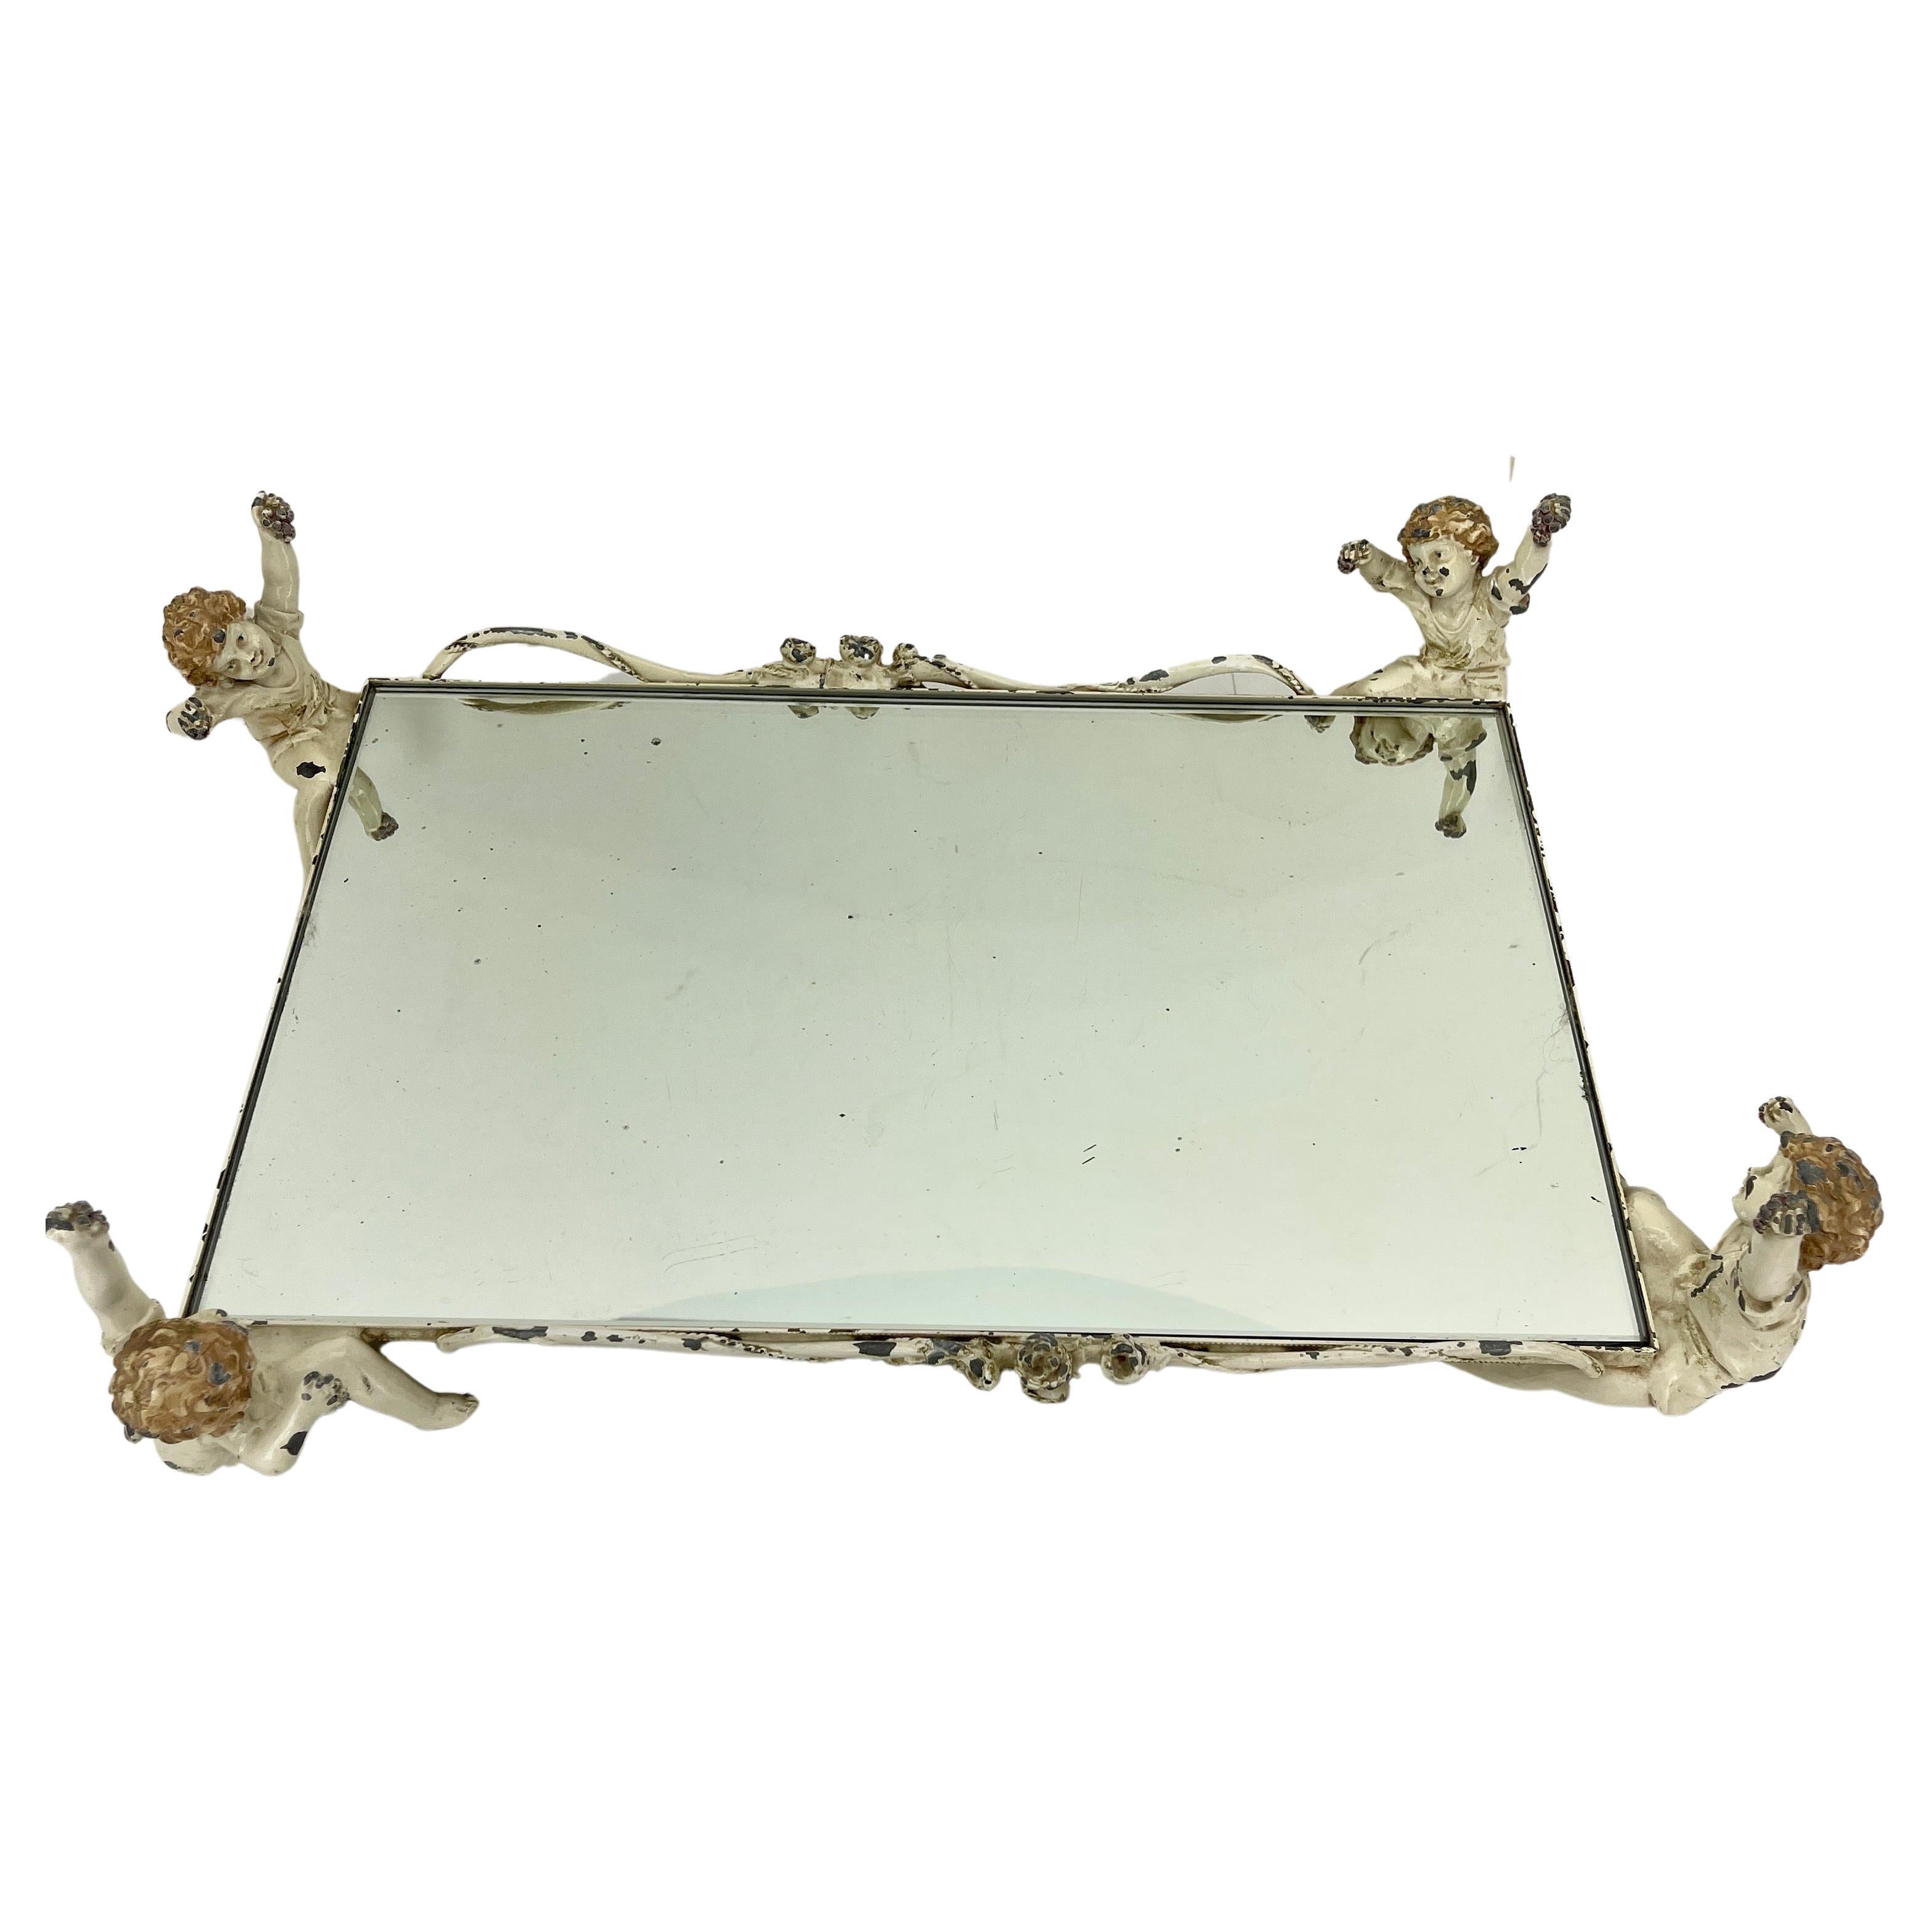 1920s Cast Iron Mirrored Cherub Tray and Centerpiece, Italy 

Charming tray from Italy featuring 4 lively iron cherubs on each corner. The attention to detail is apparent with each cherub holding wine grapes. The mirrored glass is removable and